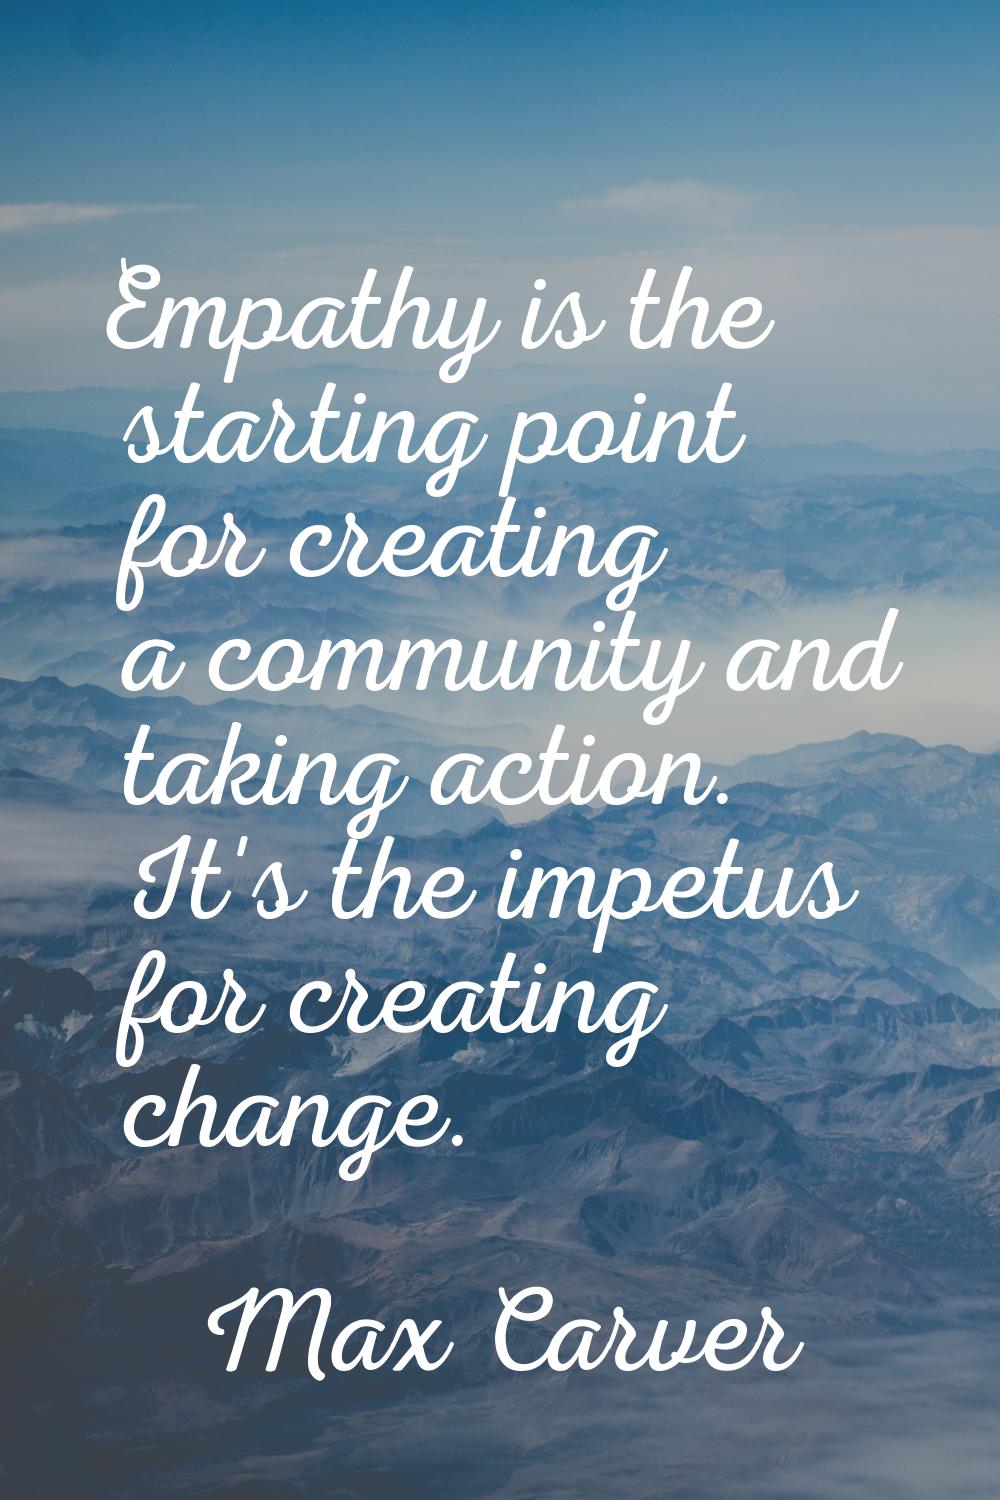 Empathy is the starting point for creating a community and taking action. It's the impetus for crea